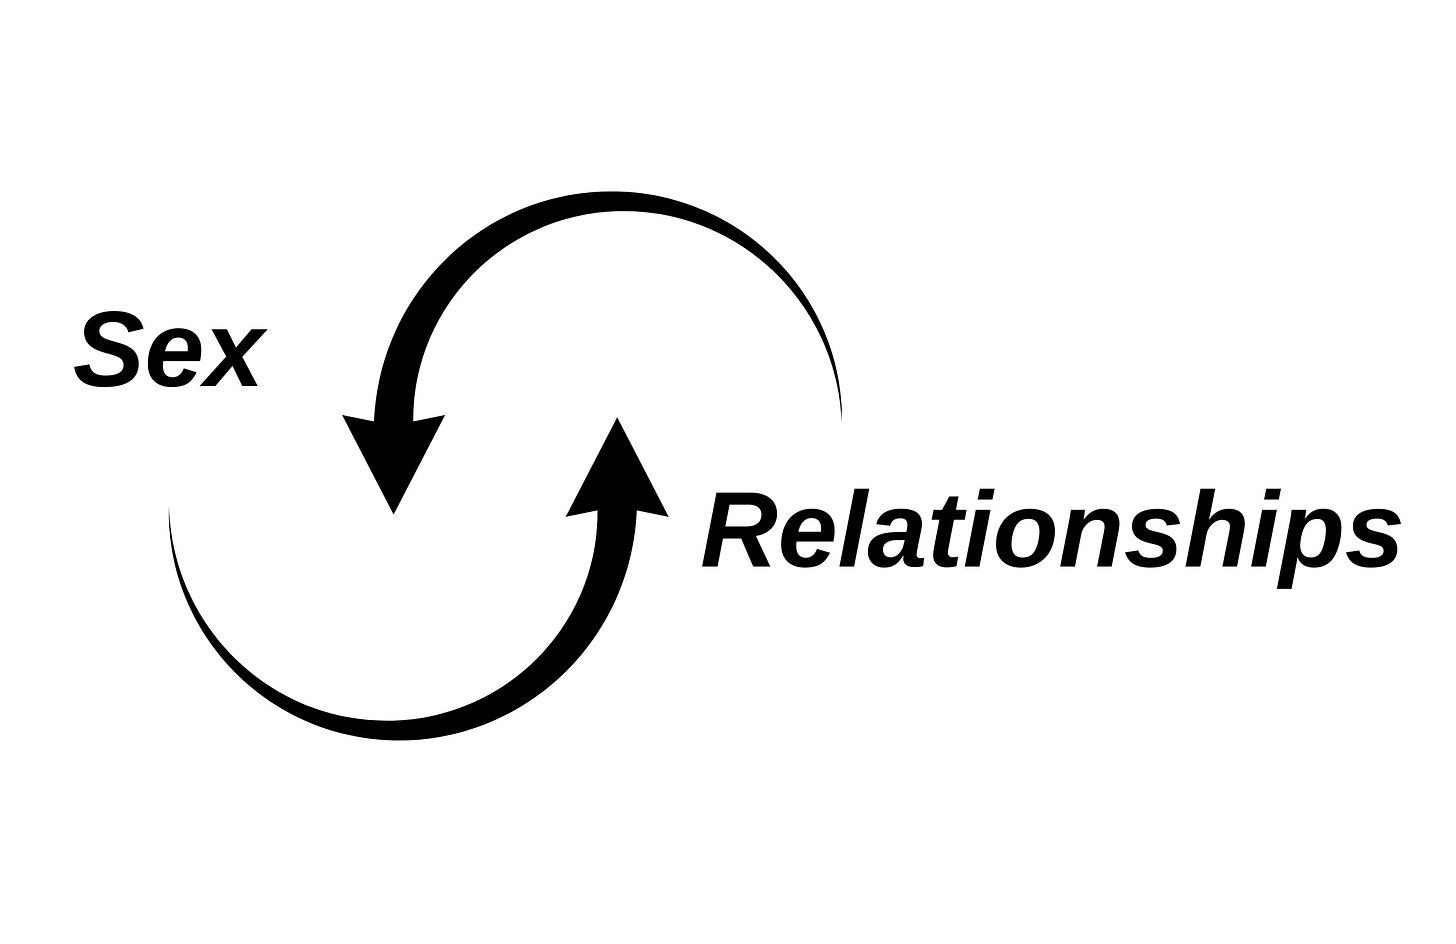 Word sex and relationships connected by two curving arrows.